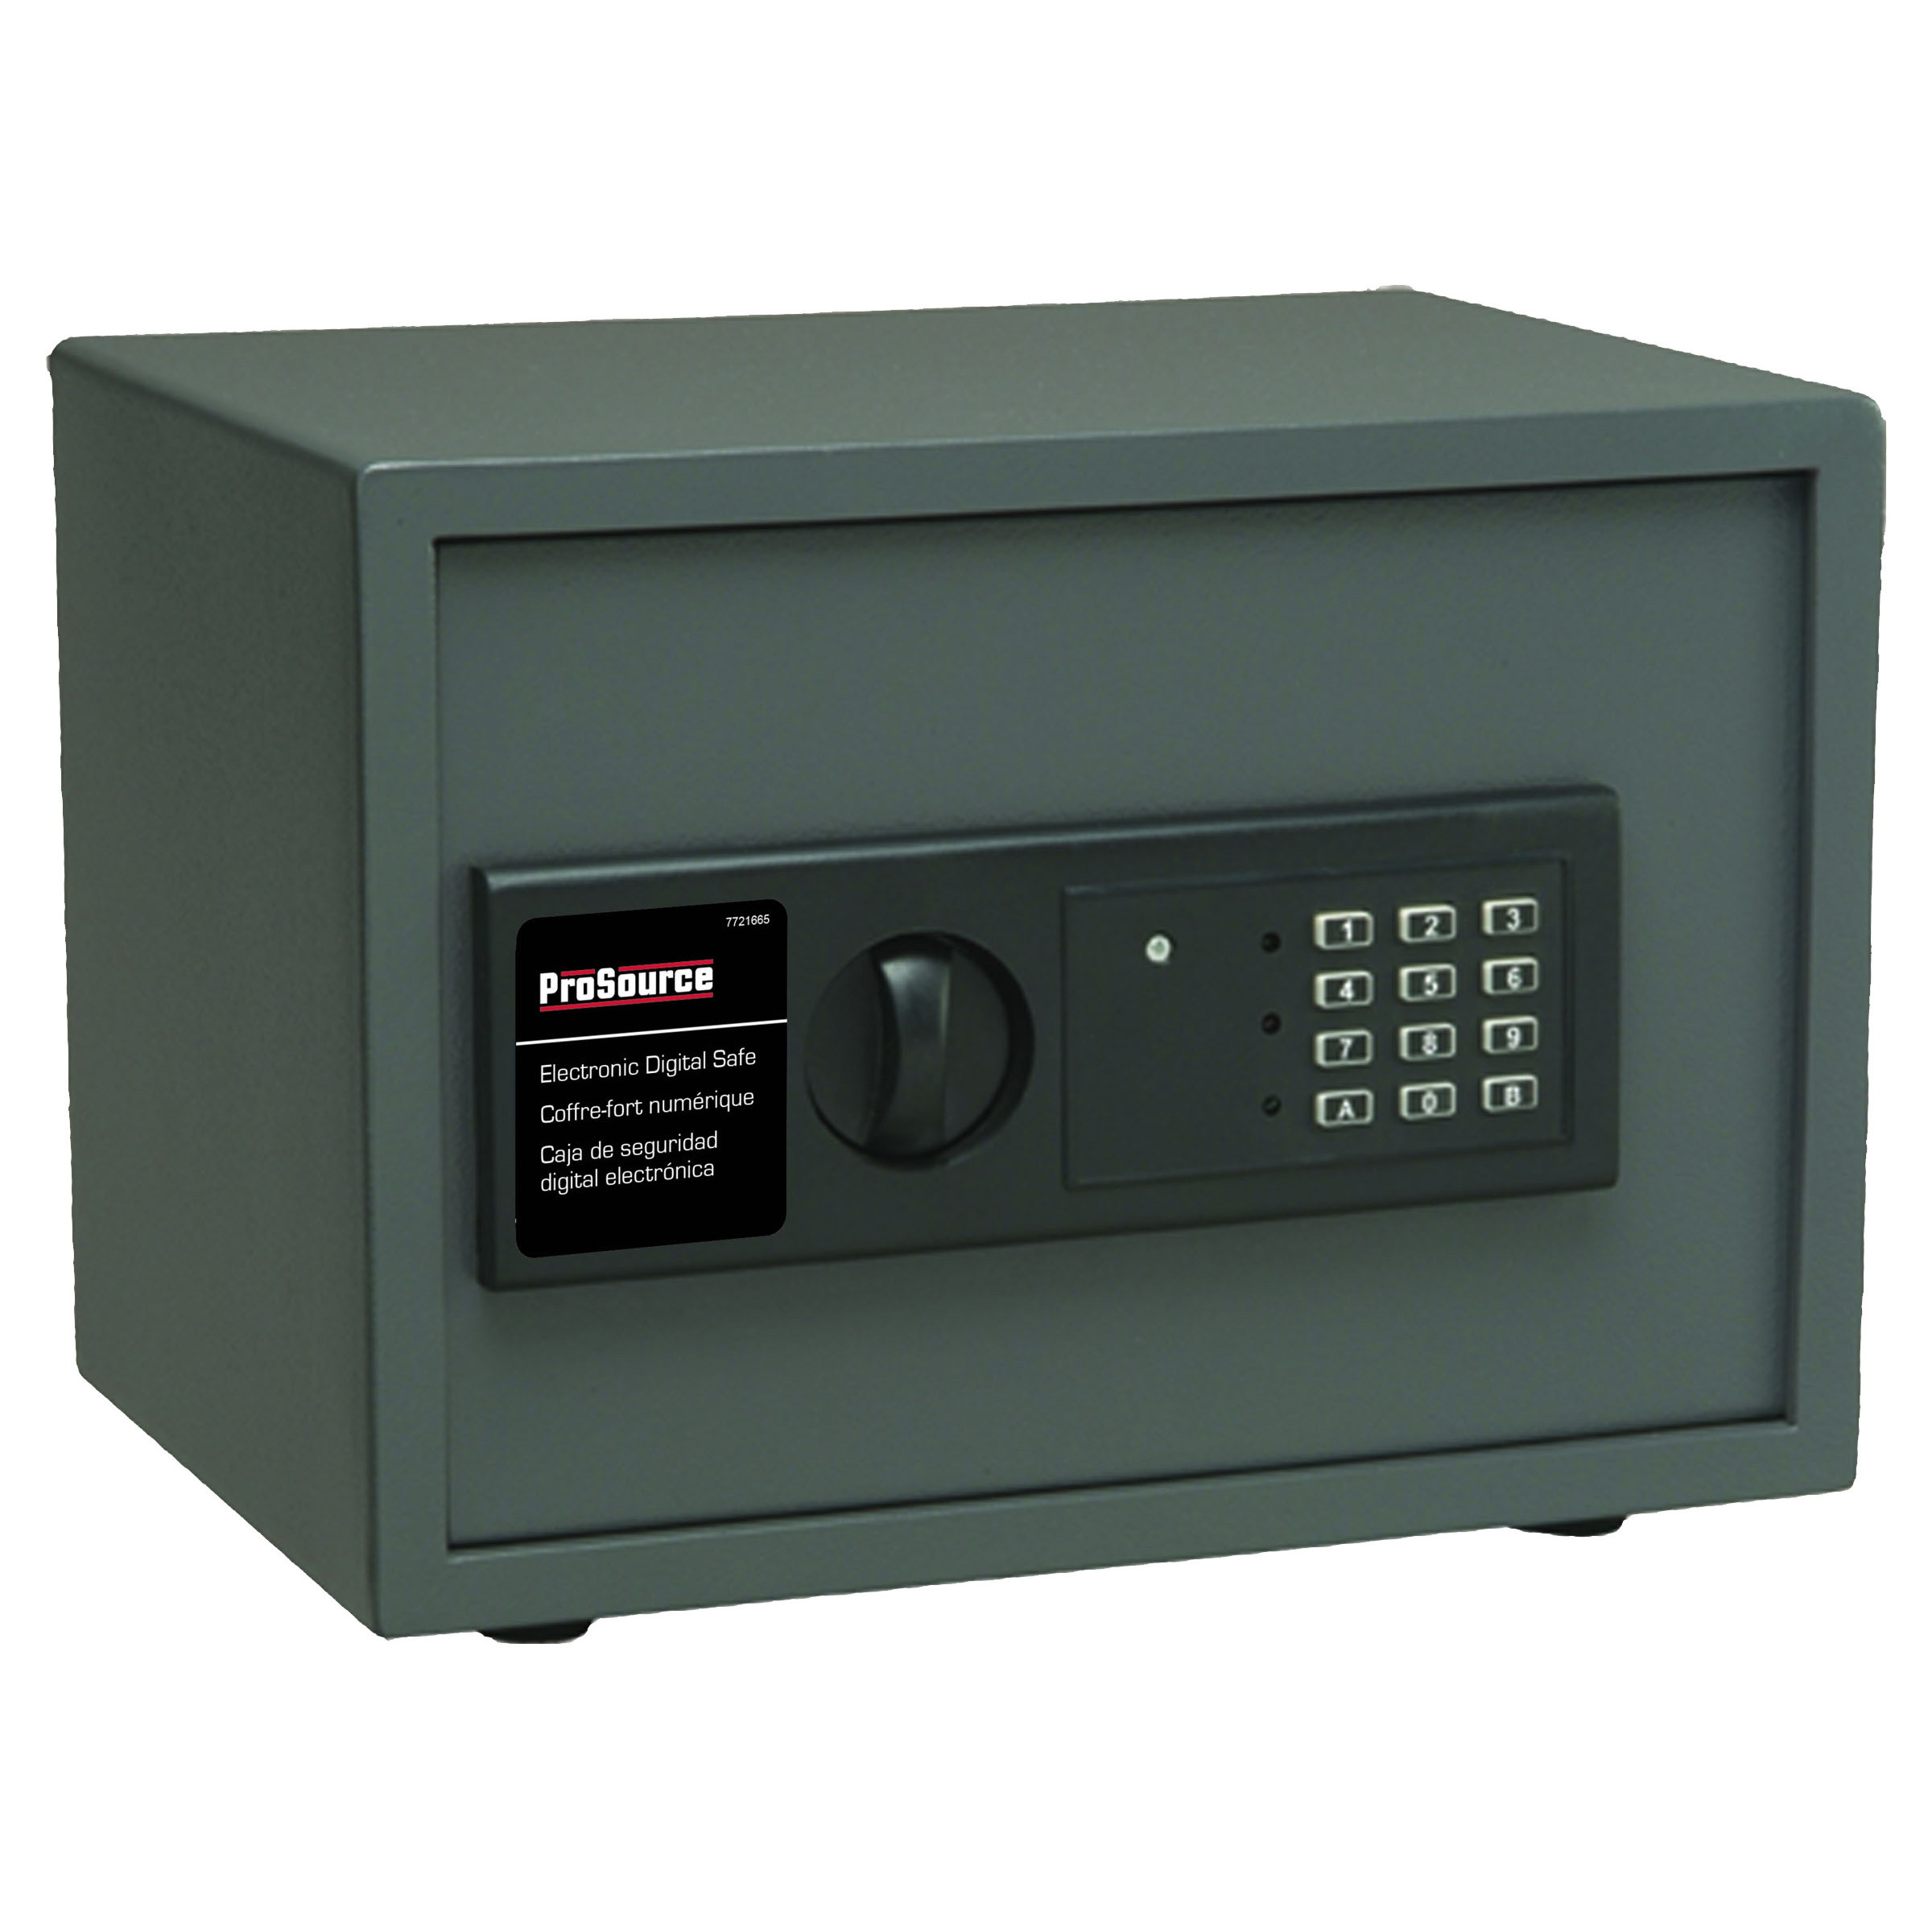 JL-45891-3L Digital Electronic Safe, 13-3/4 in W x 9-7/8 in D x 9-7/8 in H Exterior, Solid Steel, Dark Gray